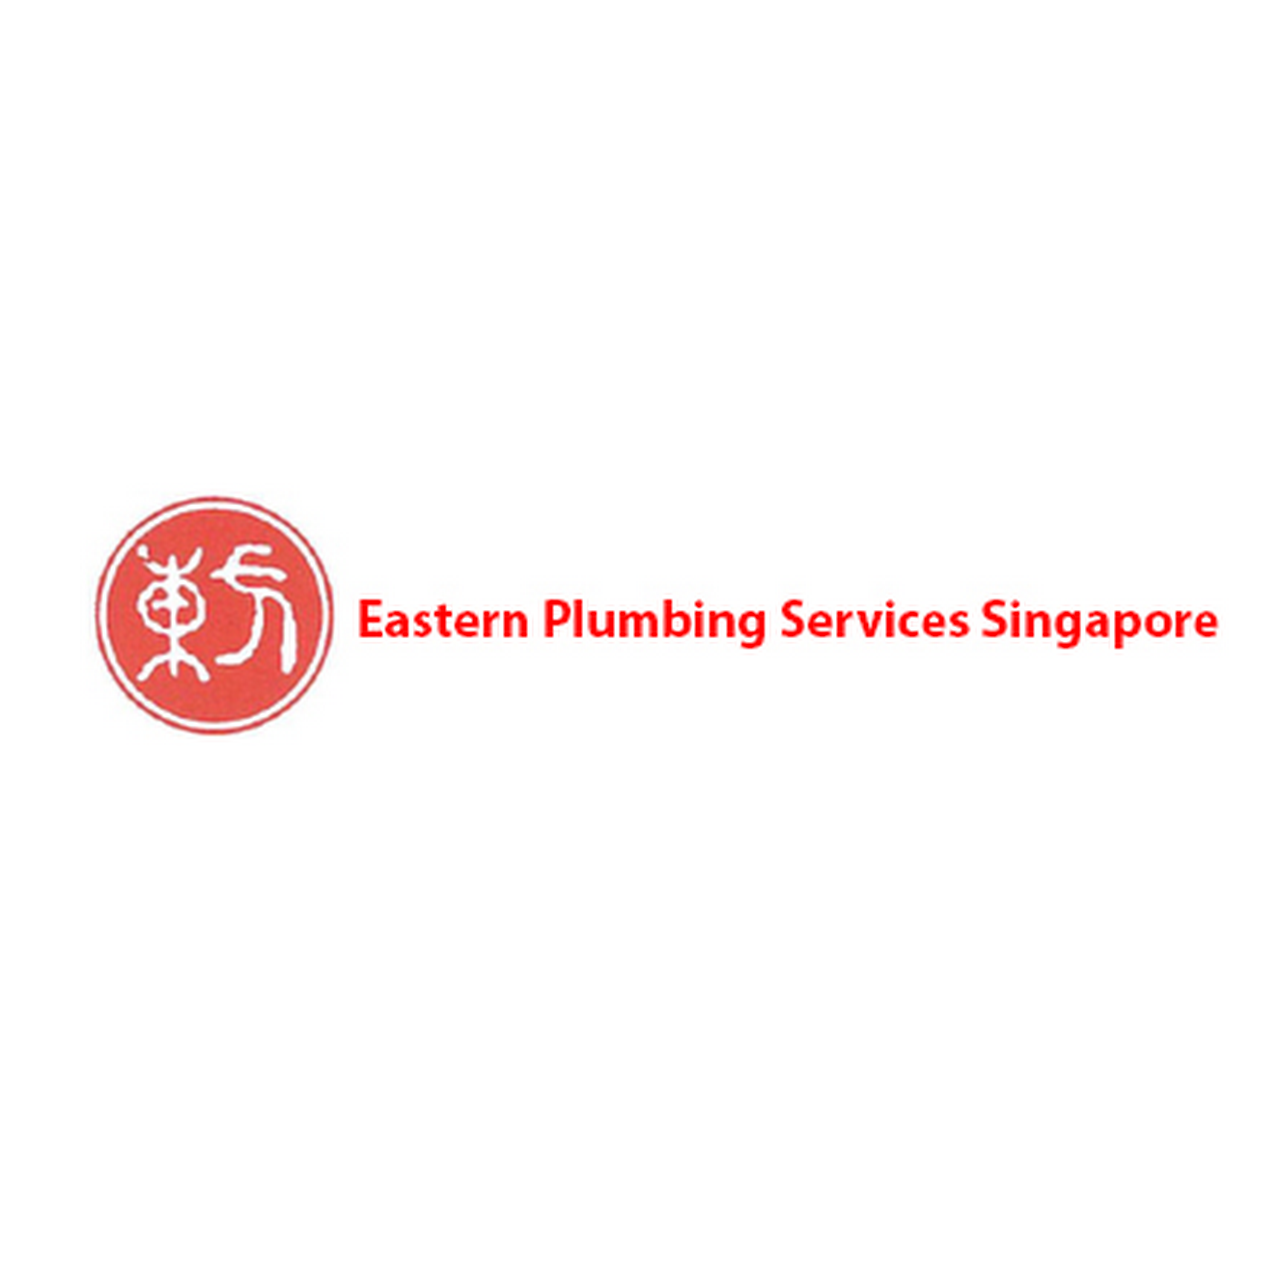 Eastern Plumbing Services -Plumbing Services Singapore  